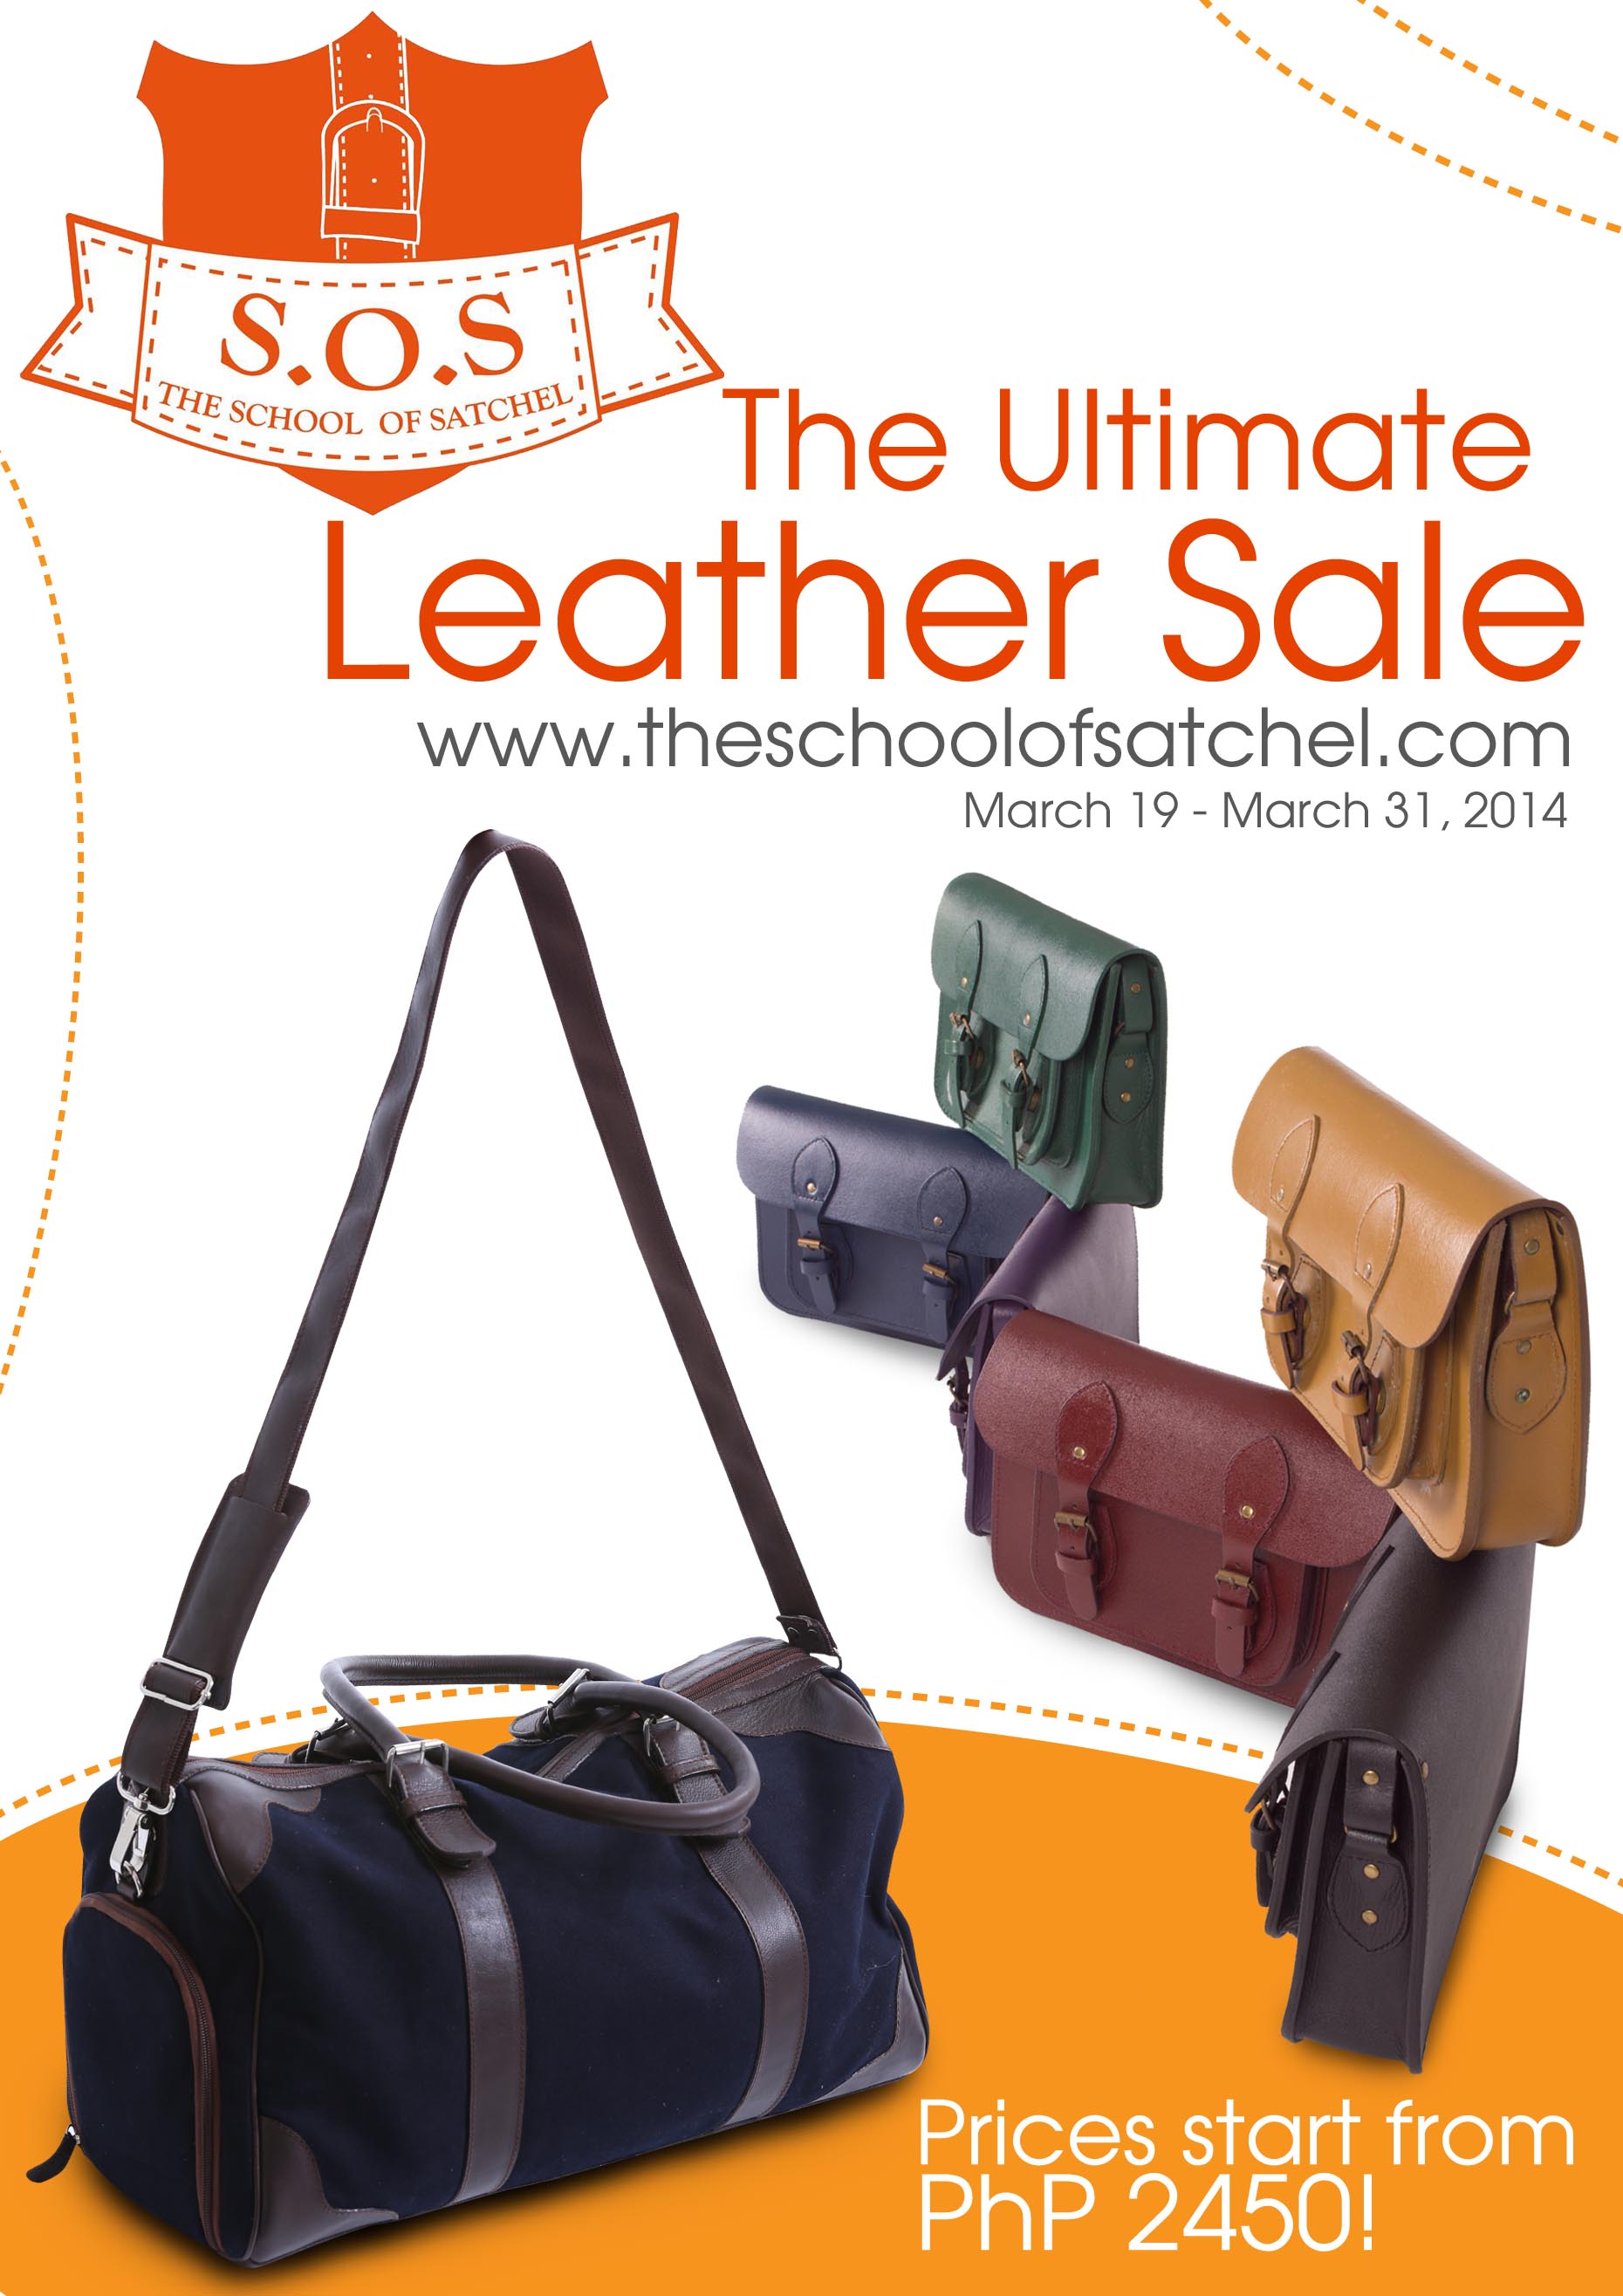 The School of Satchel The Ultimate Leather Sale March 2014